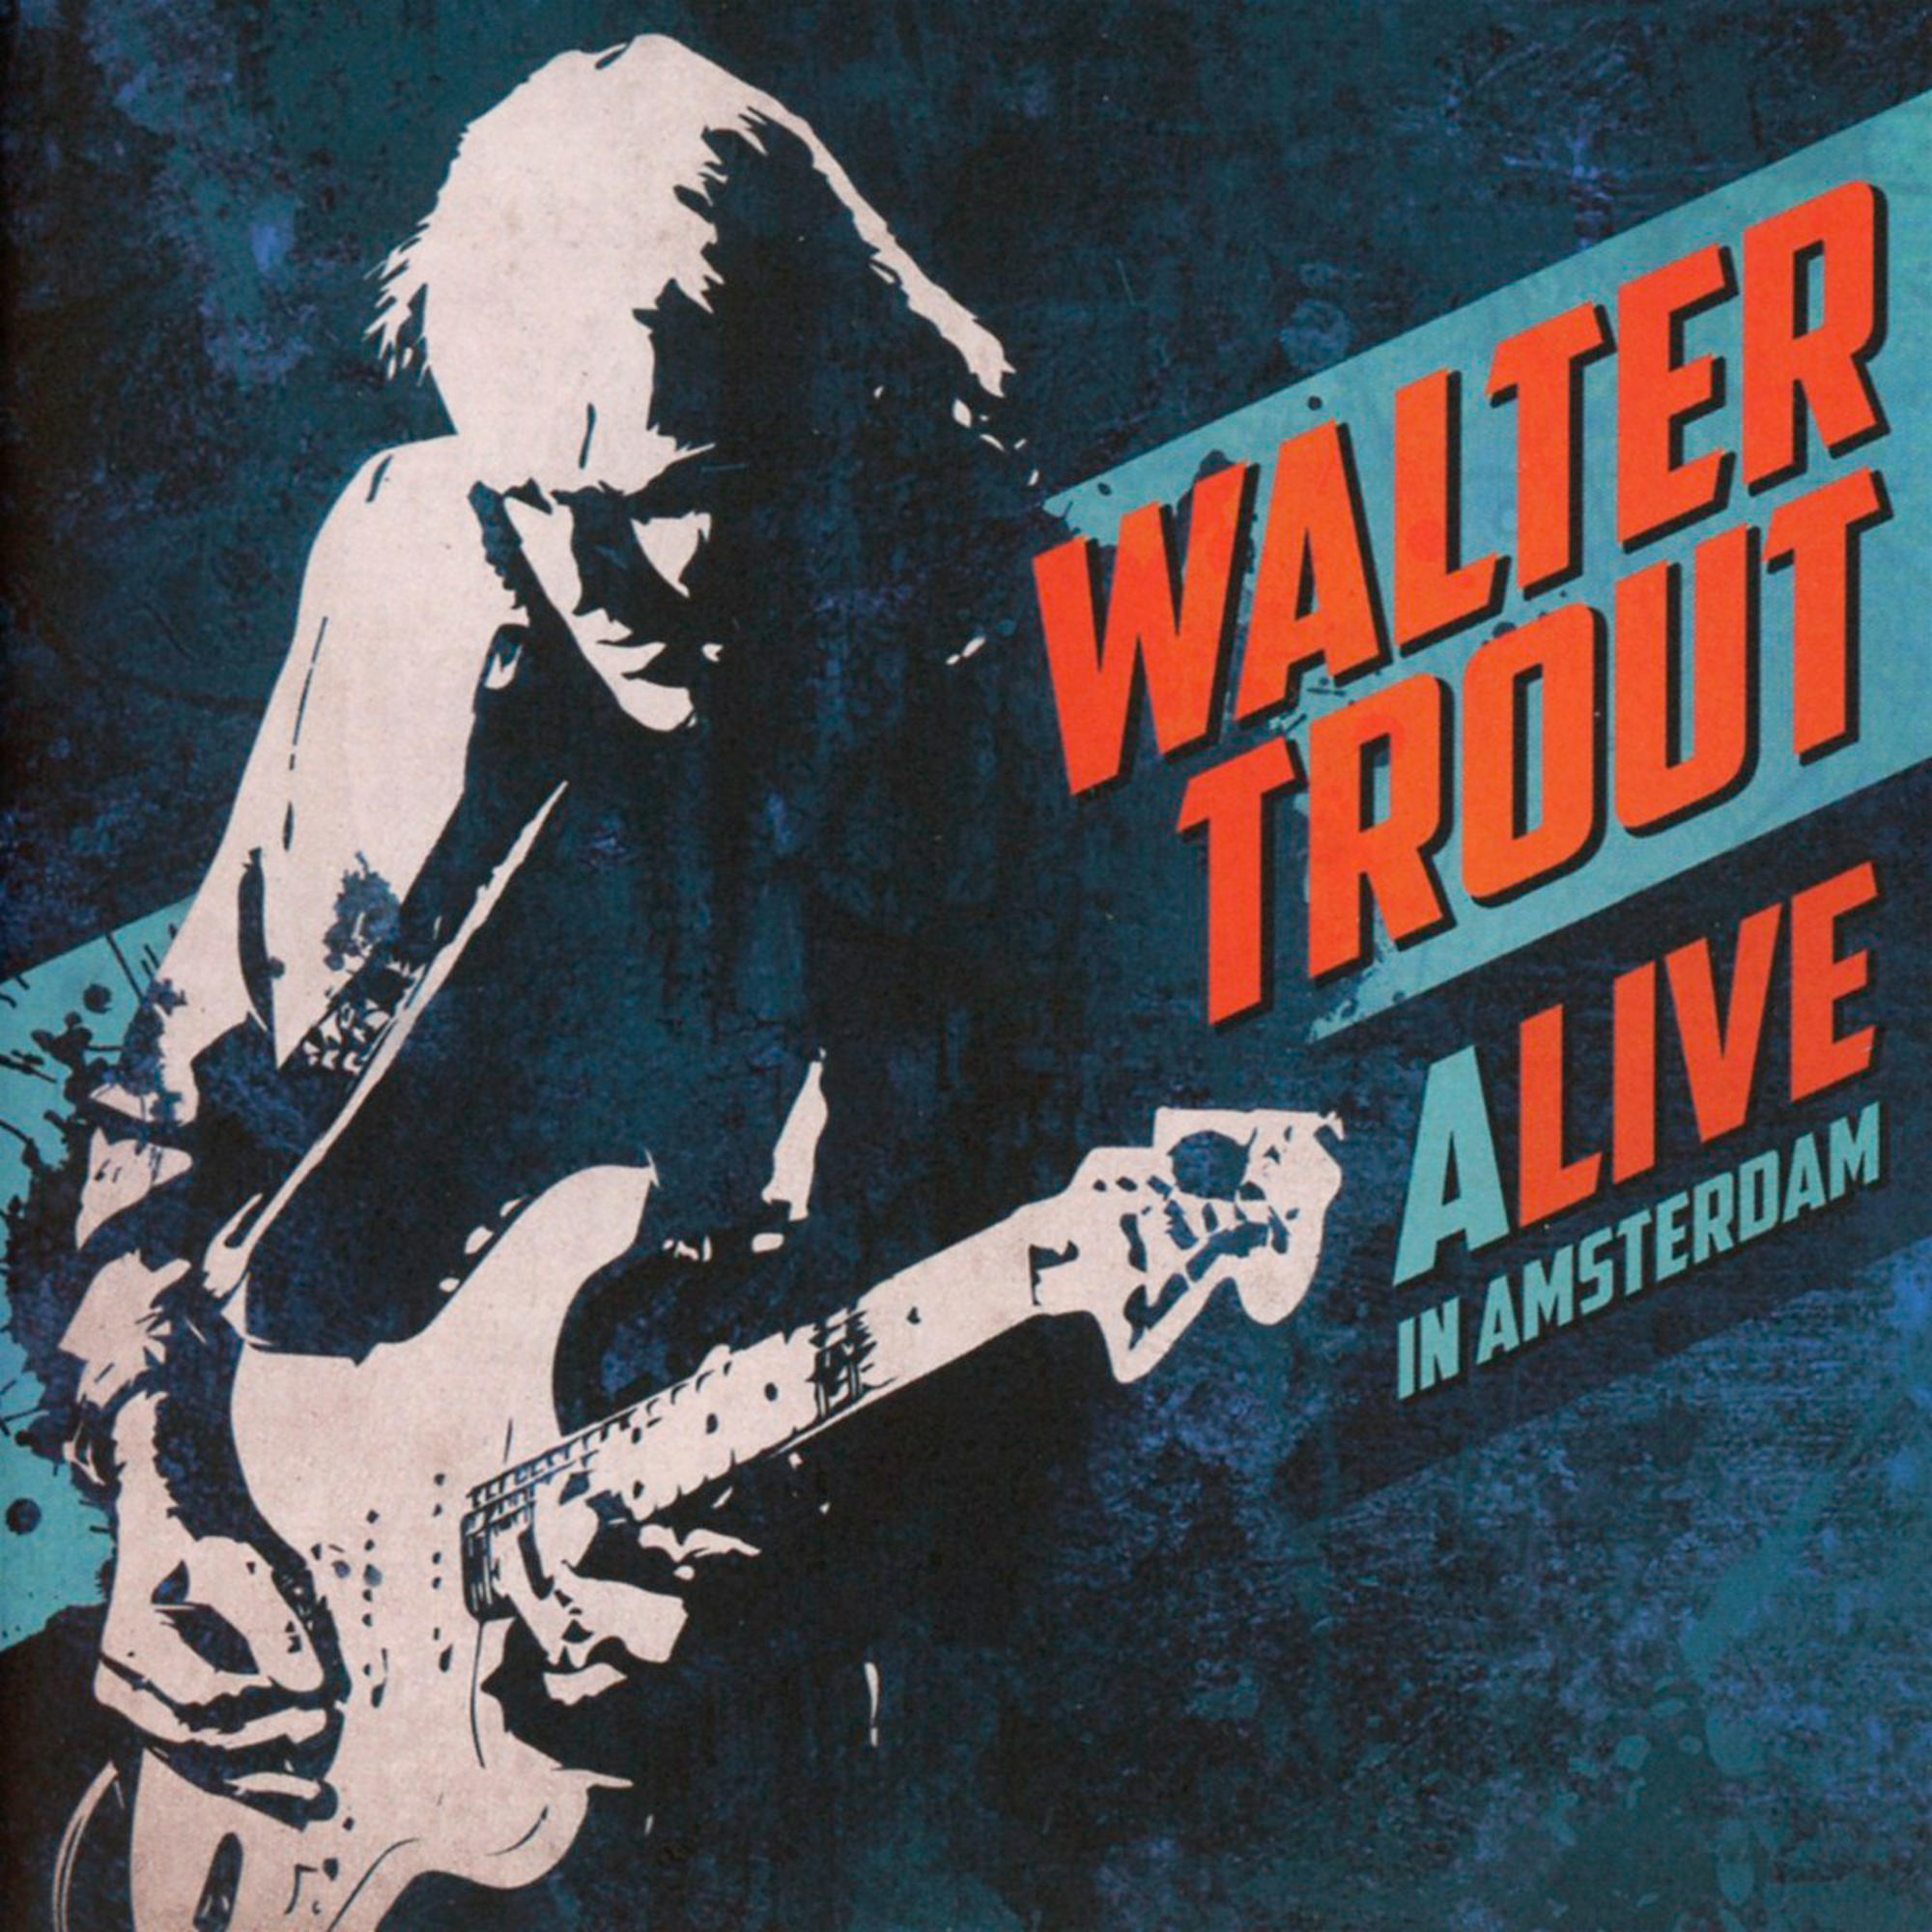 (CD) Walter - ALIVE Trout In Amsterdam -